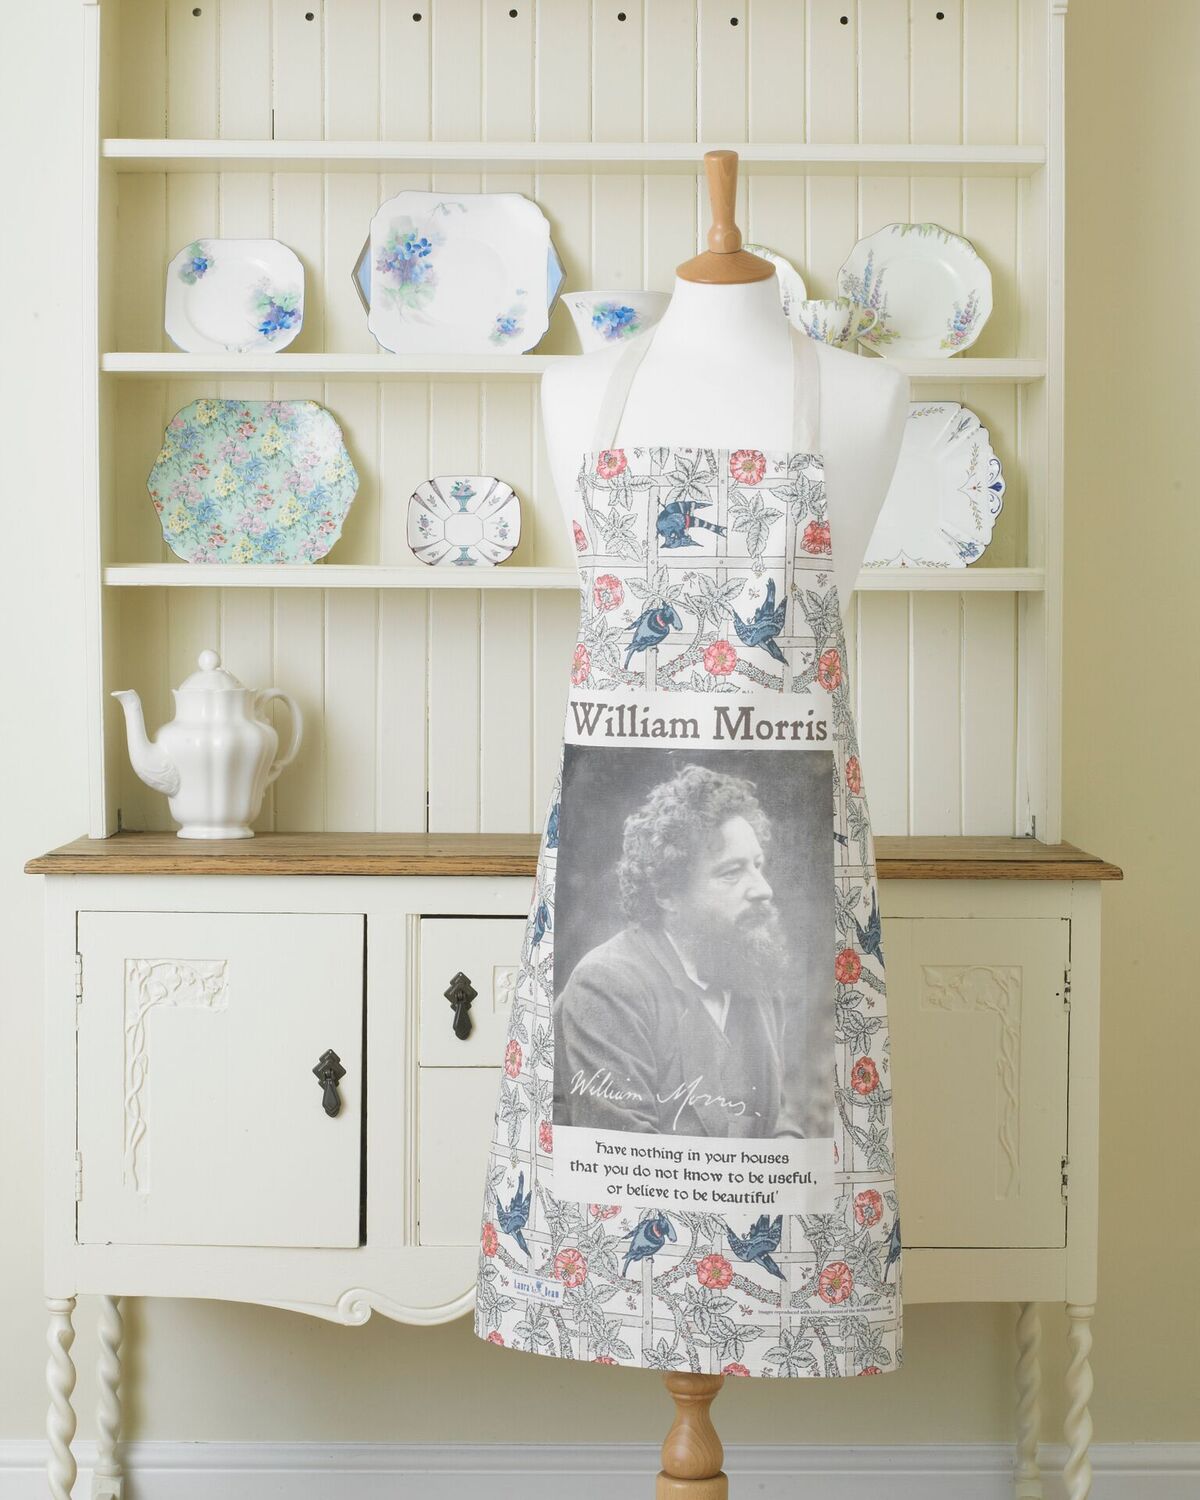 Stamp Press Have nothing in your house that you do not know to be useful Quote By William Morris Cotton Napkin / Dinner Cloth NK00018434 or believe to be beautiful 